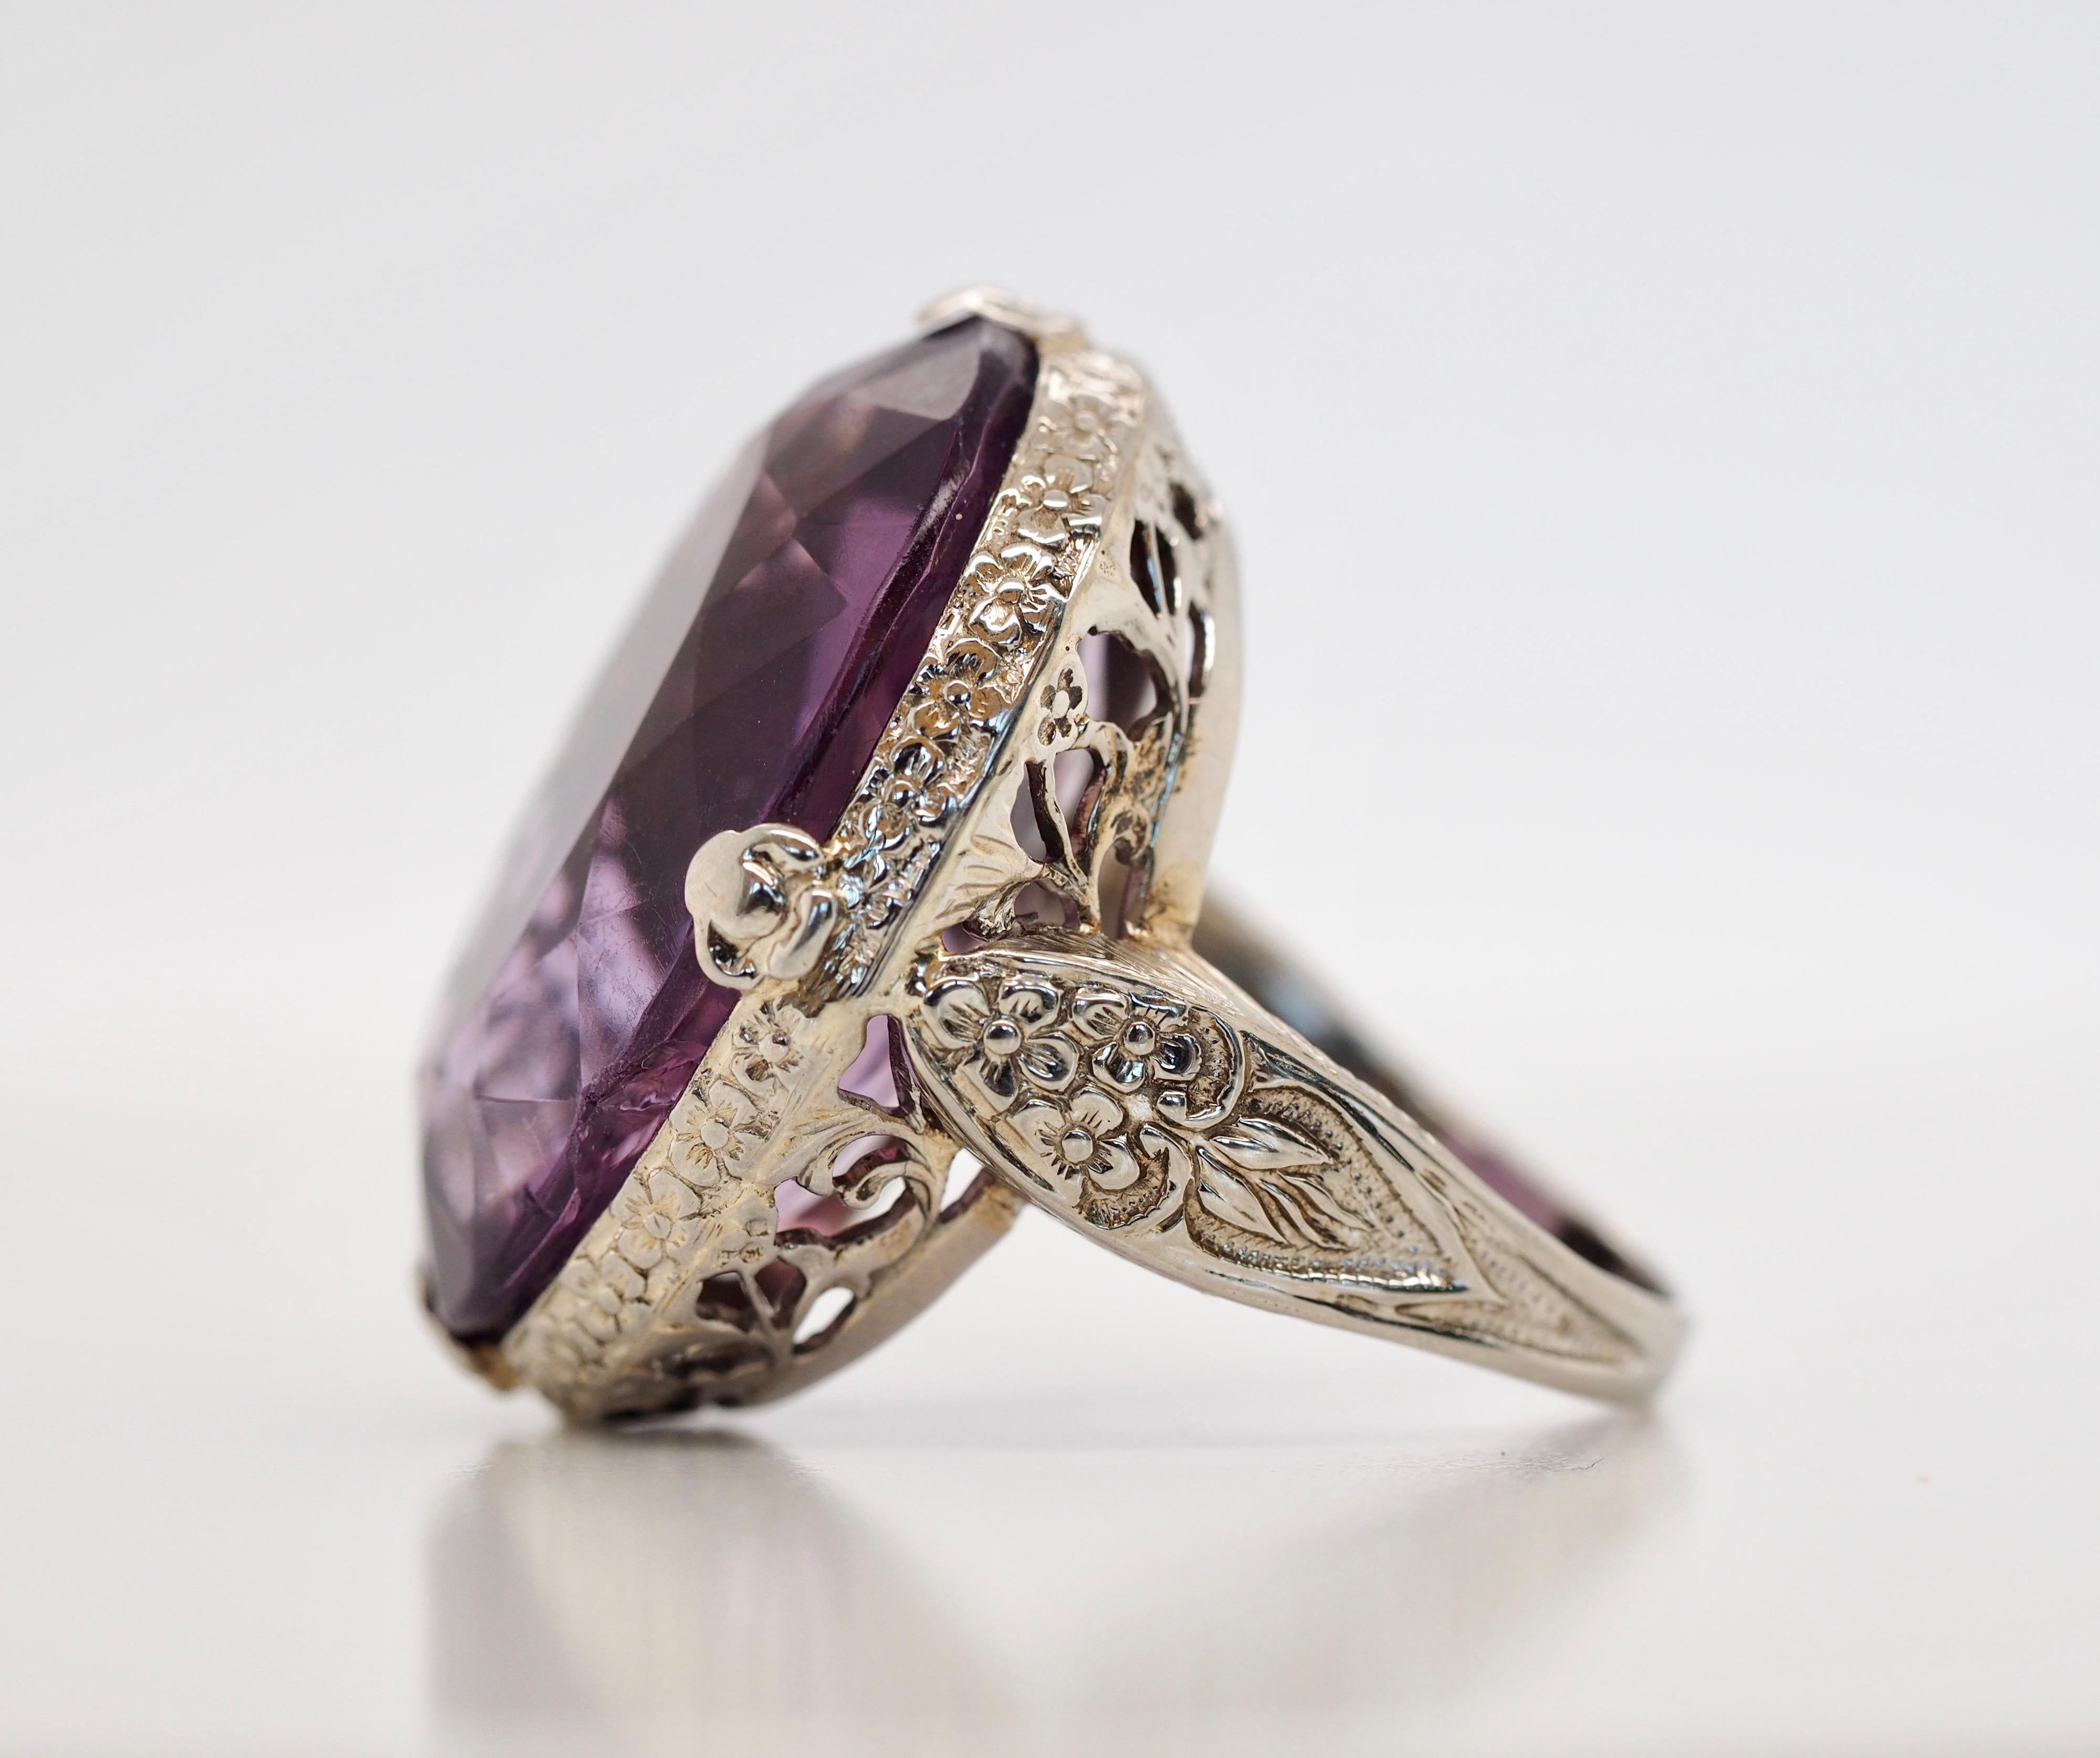 This stunning Art Deco ring is a statement piece that is sure to add grace and beauty to any outfit or vintage collection. The calling card for this ring is an incredible over-sized, natural, oval cut Amethyst stone set in 18K white gold. The stone